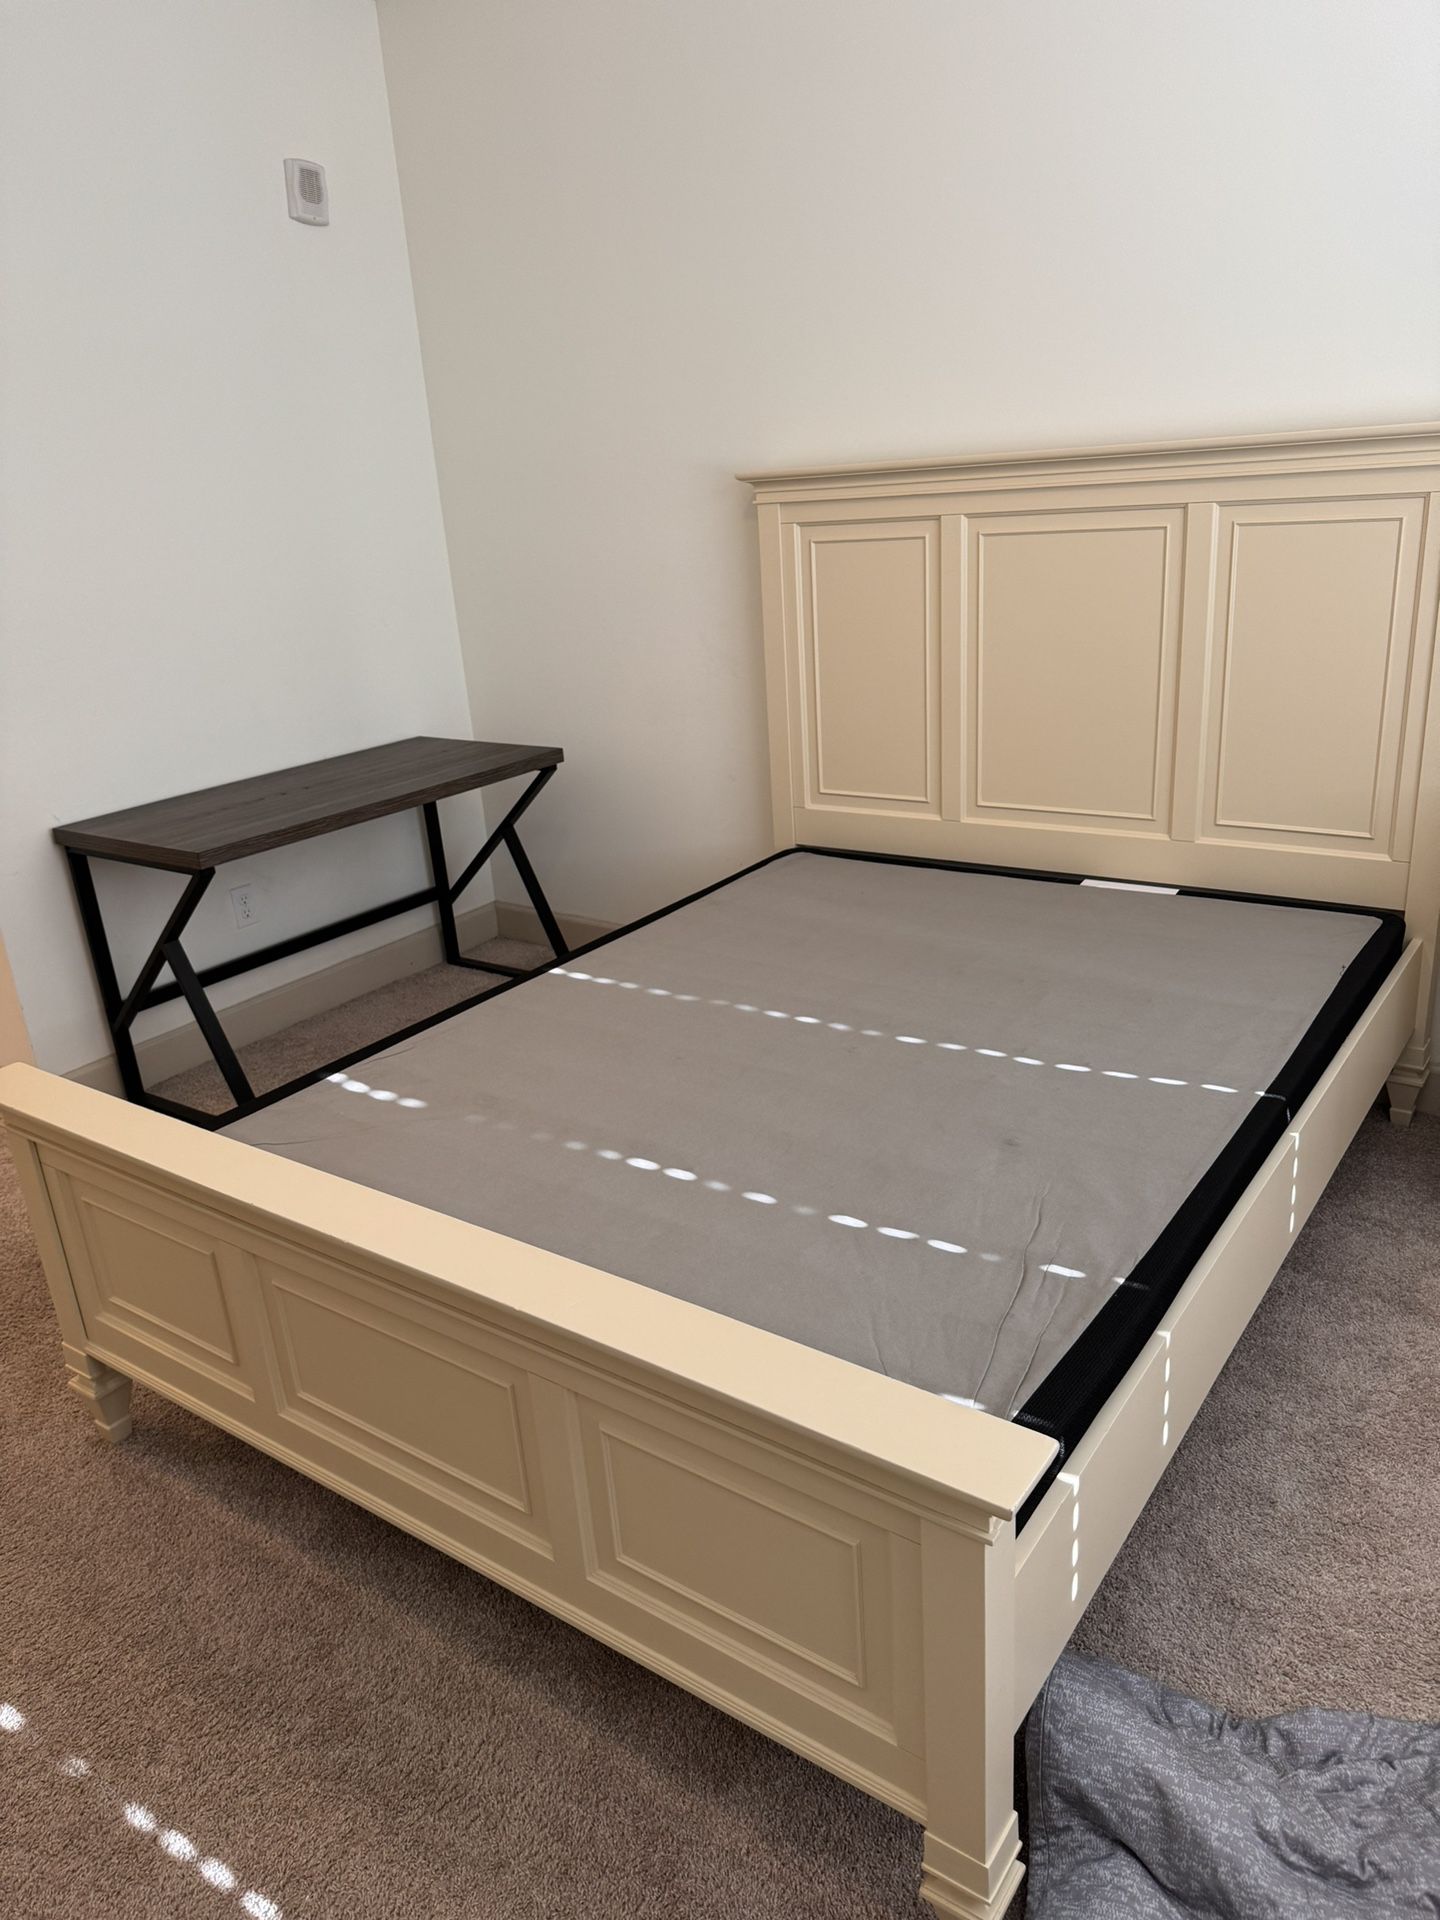 Queen Bed Frame And Box Spring Pick Up Asap